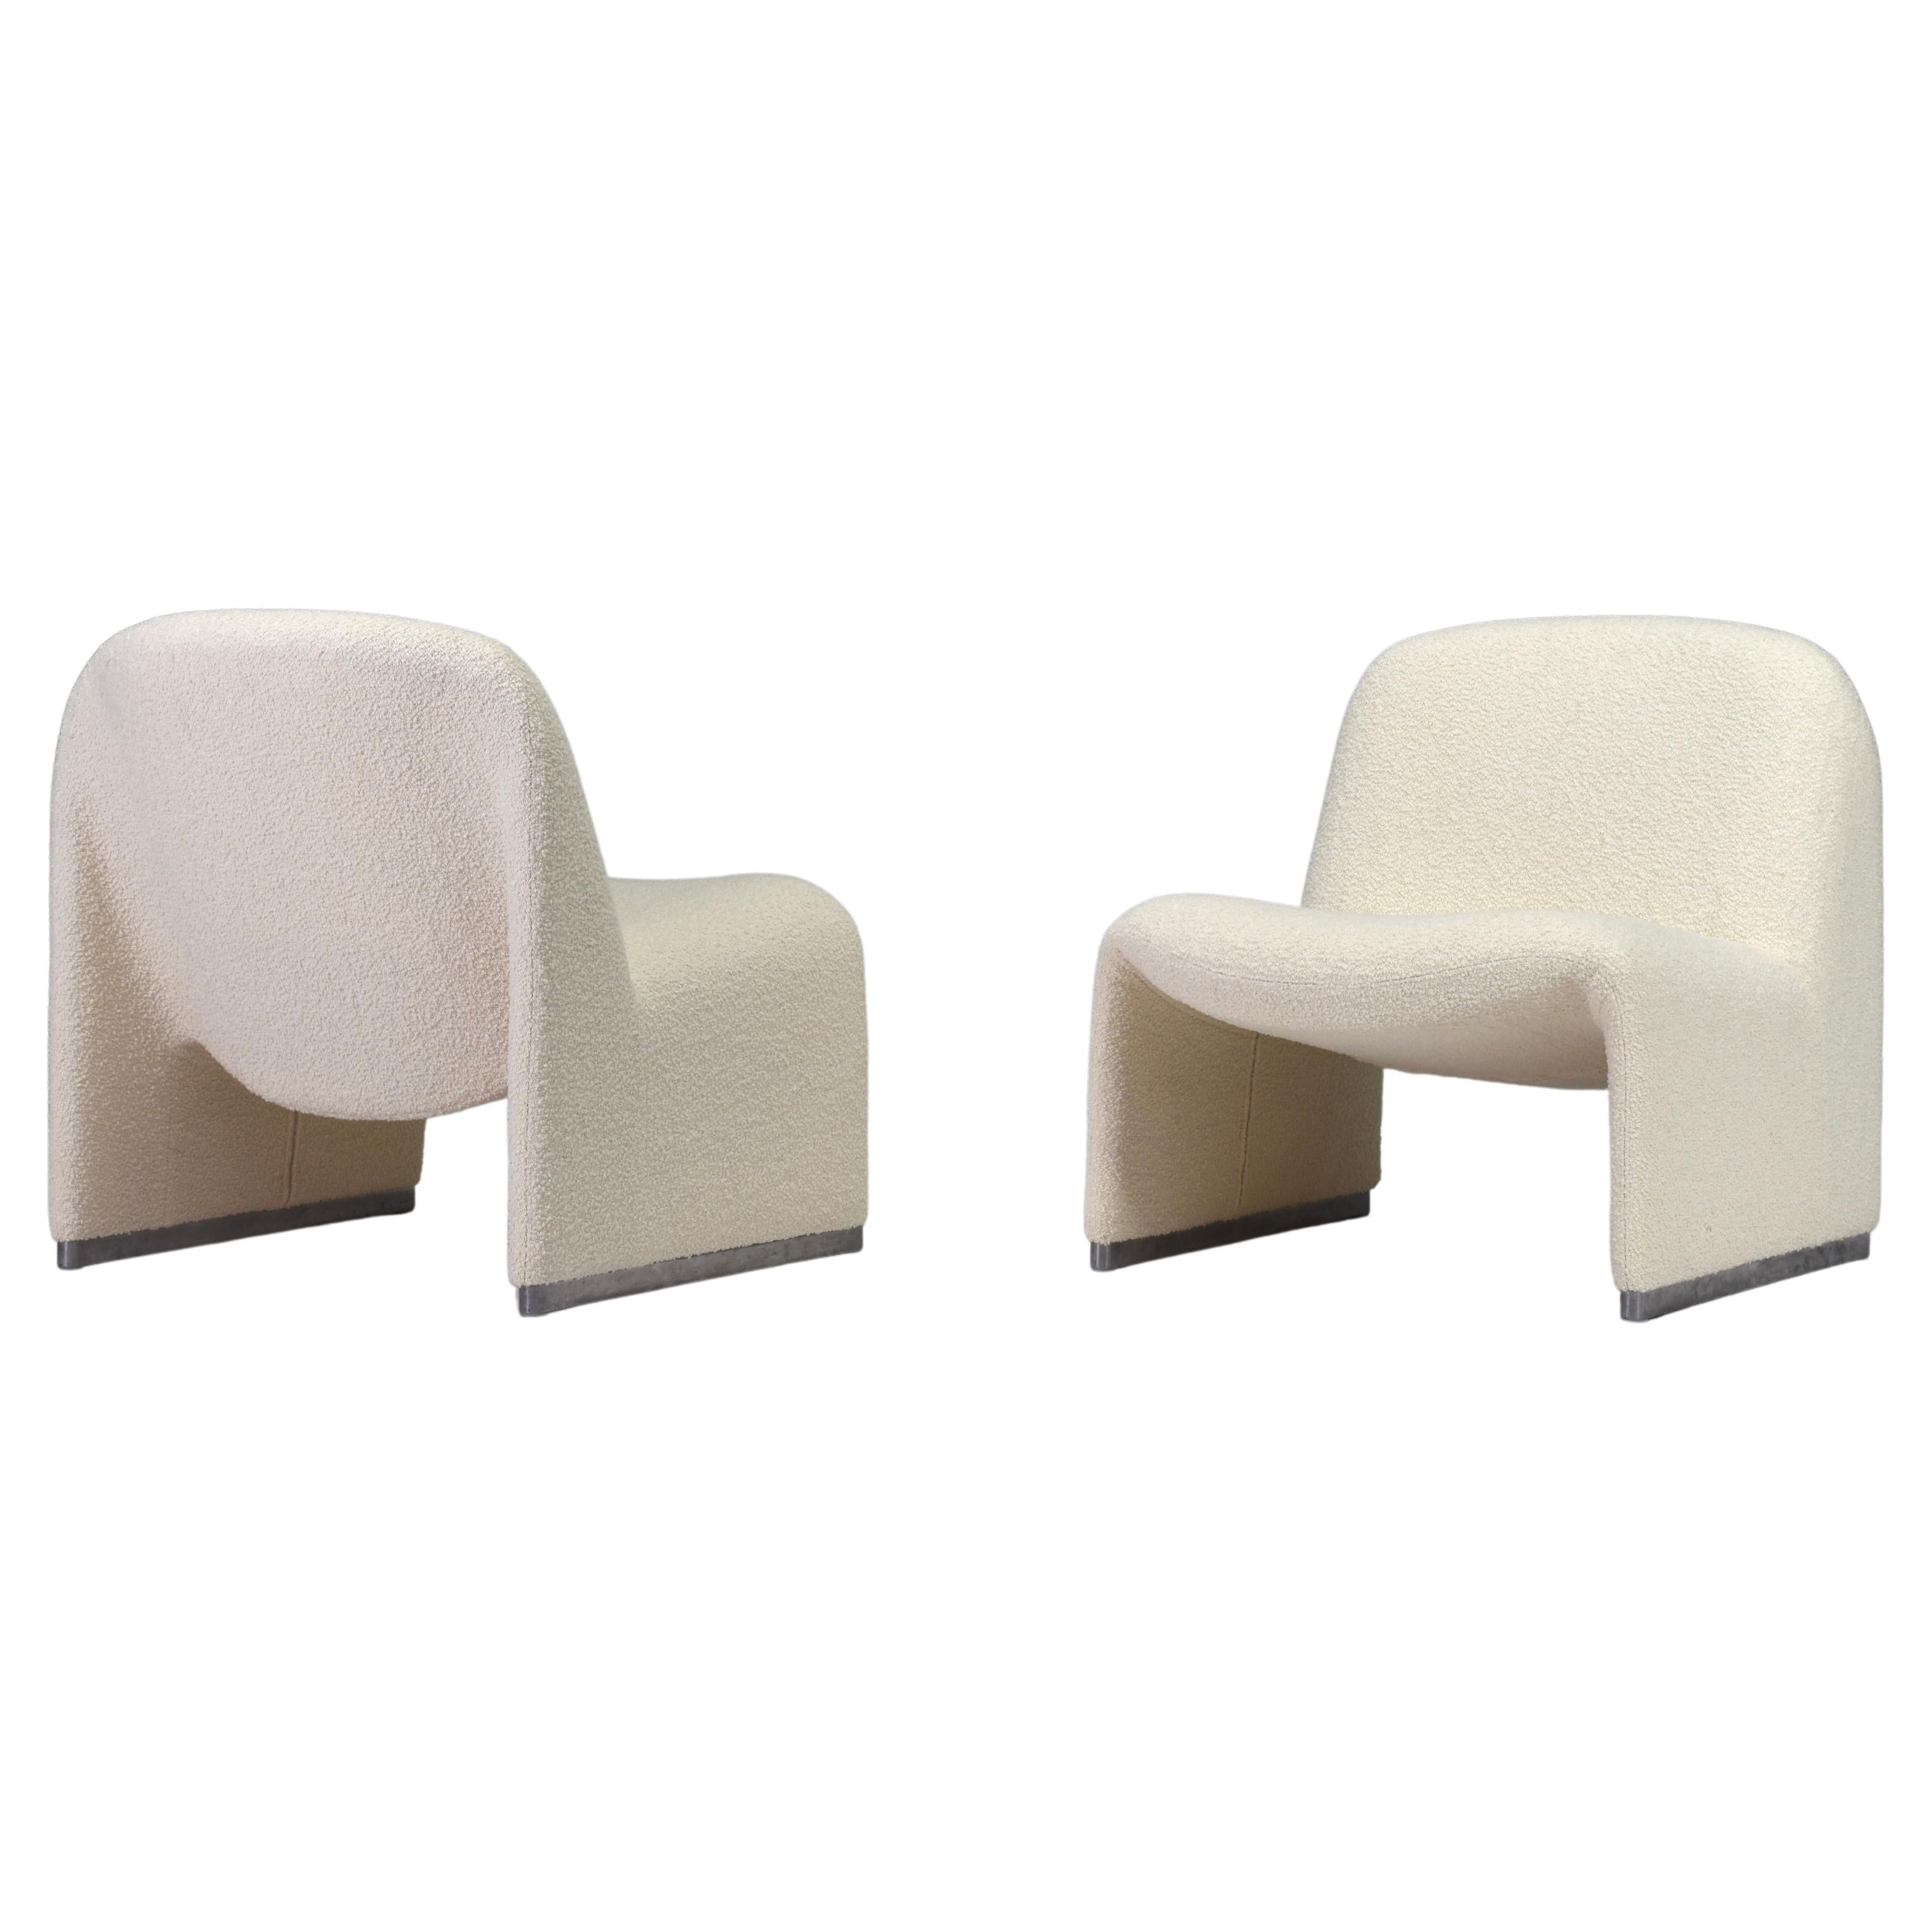 Alky Chairs by Giancarlo Piretti for Castelli New Upholstery, Italy, circa 1970